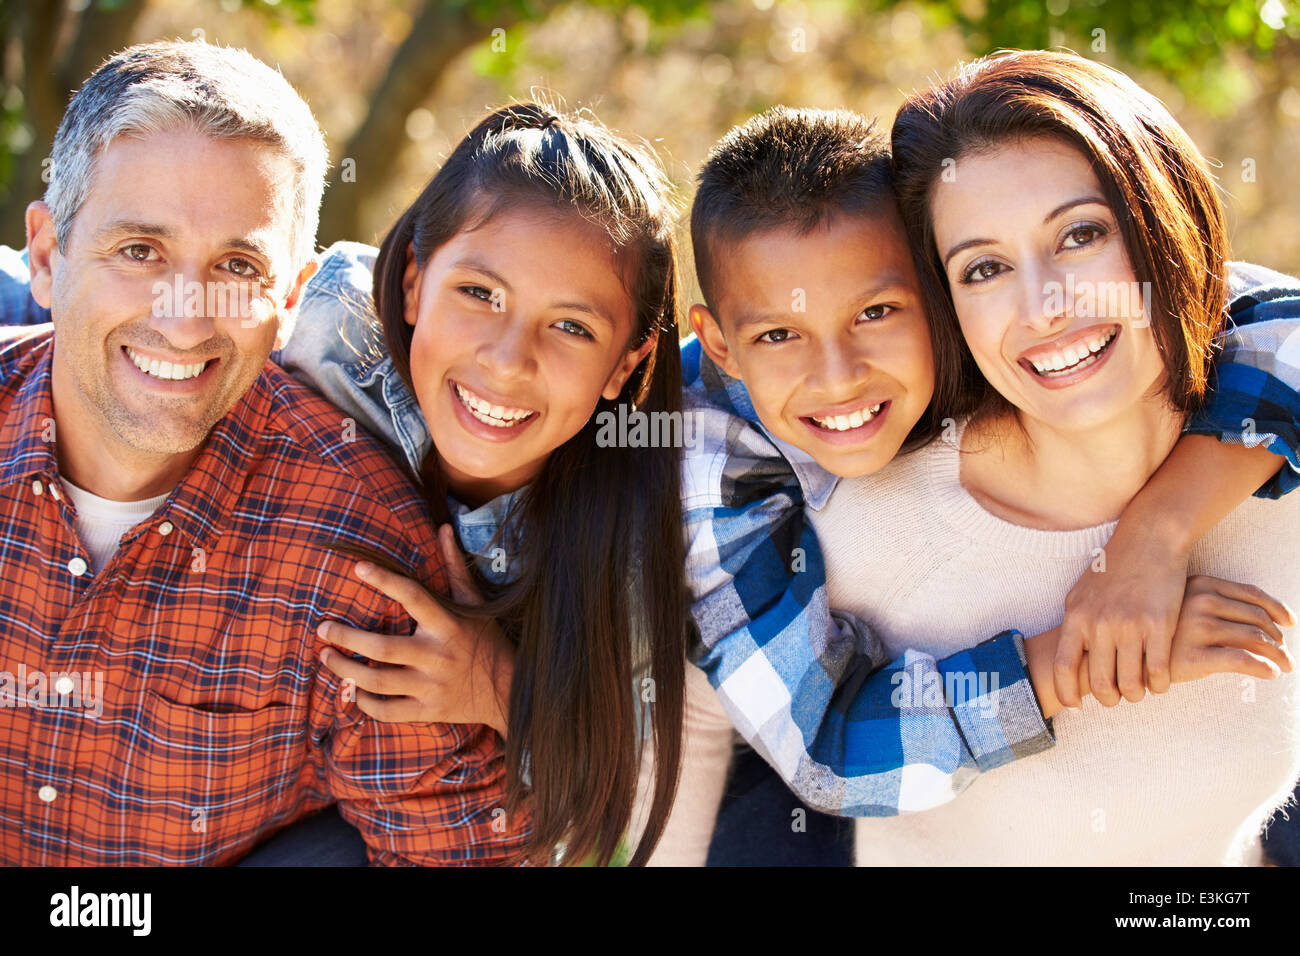 Portrait of Hispanic Family in Countryside Banque D'Images